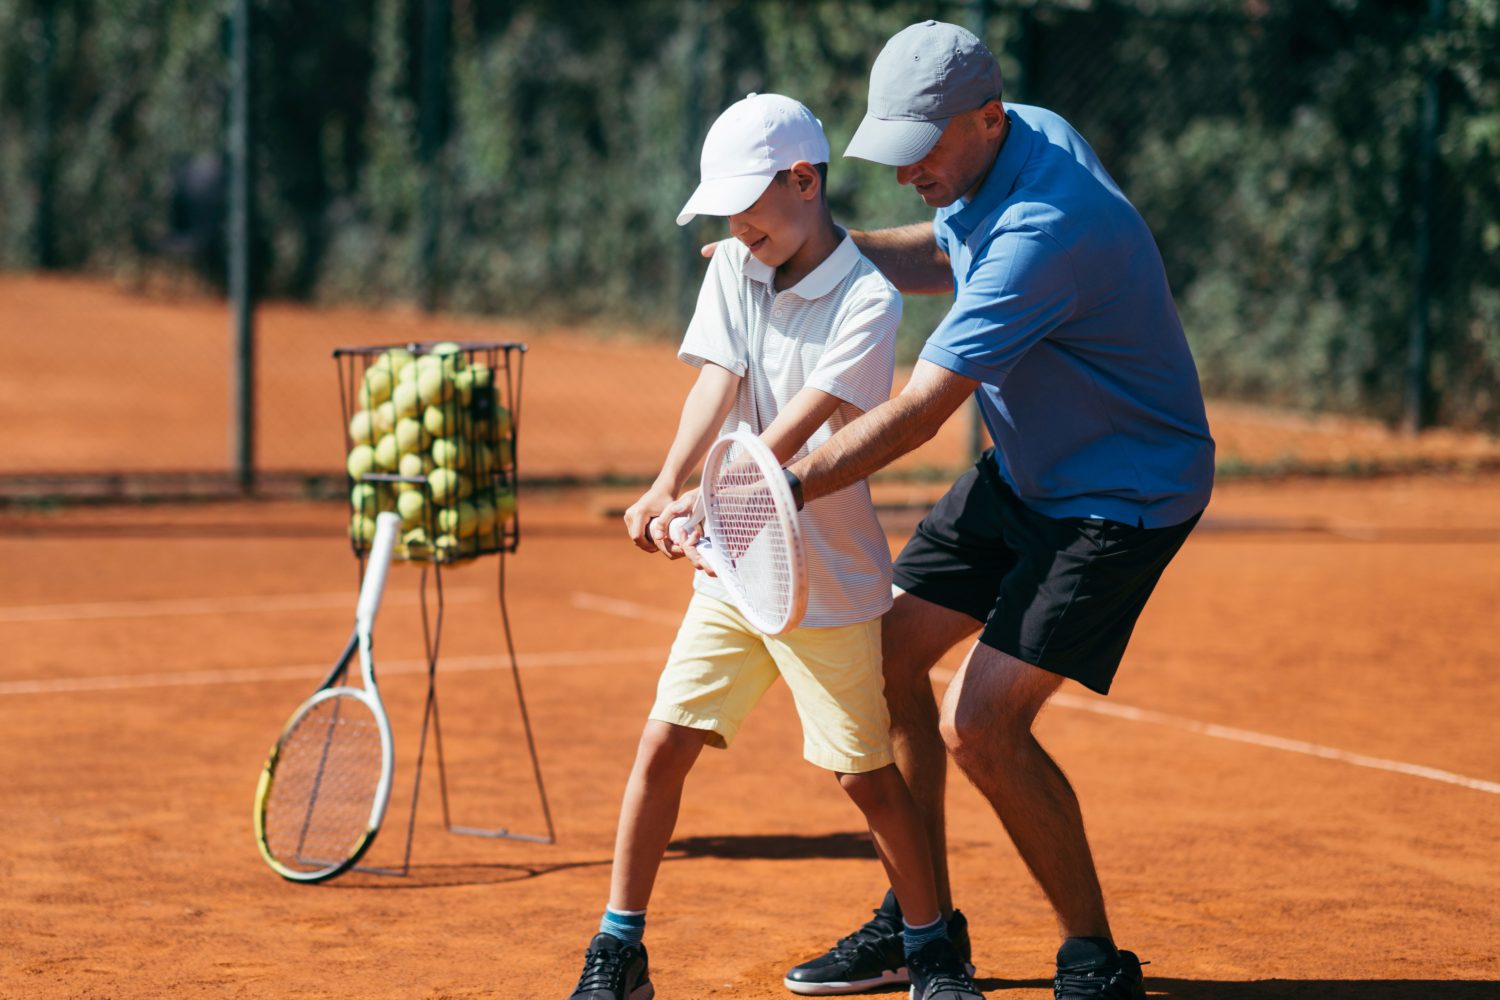 Use Our Tennis Scheduling App to Manage Your Tennis Lessons